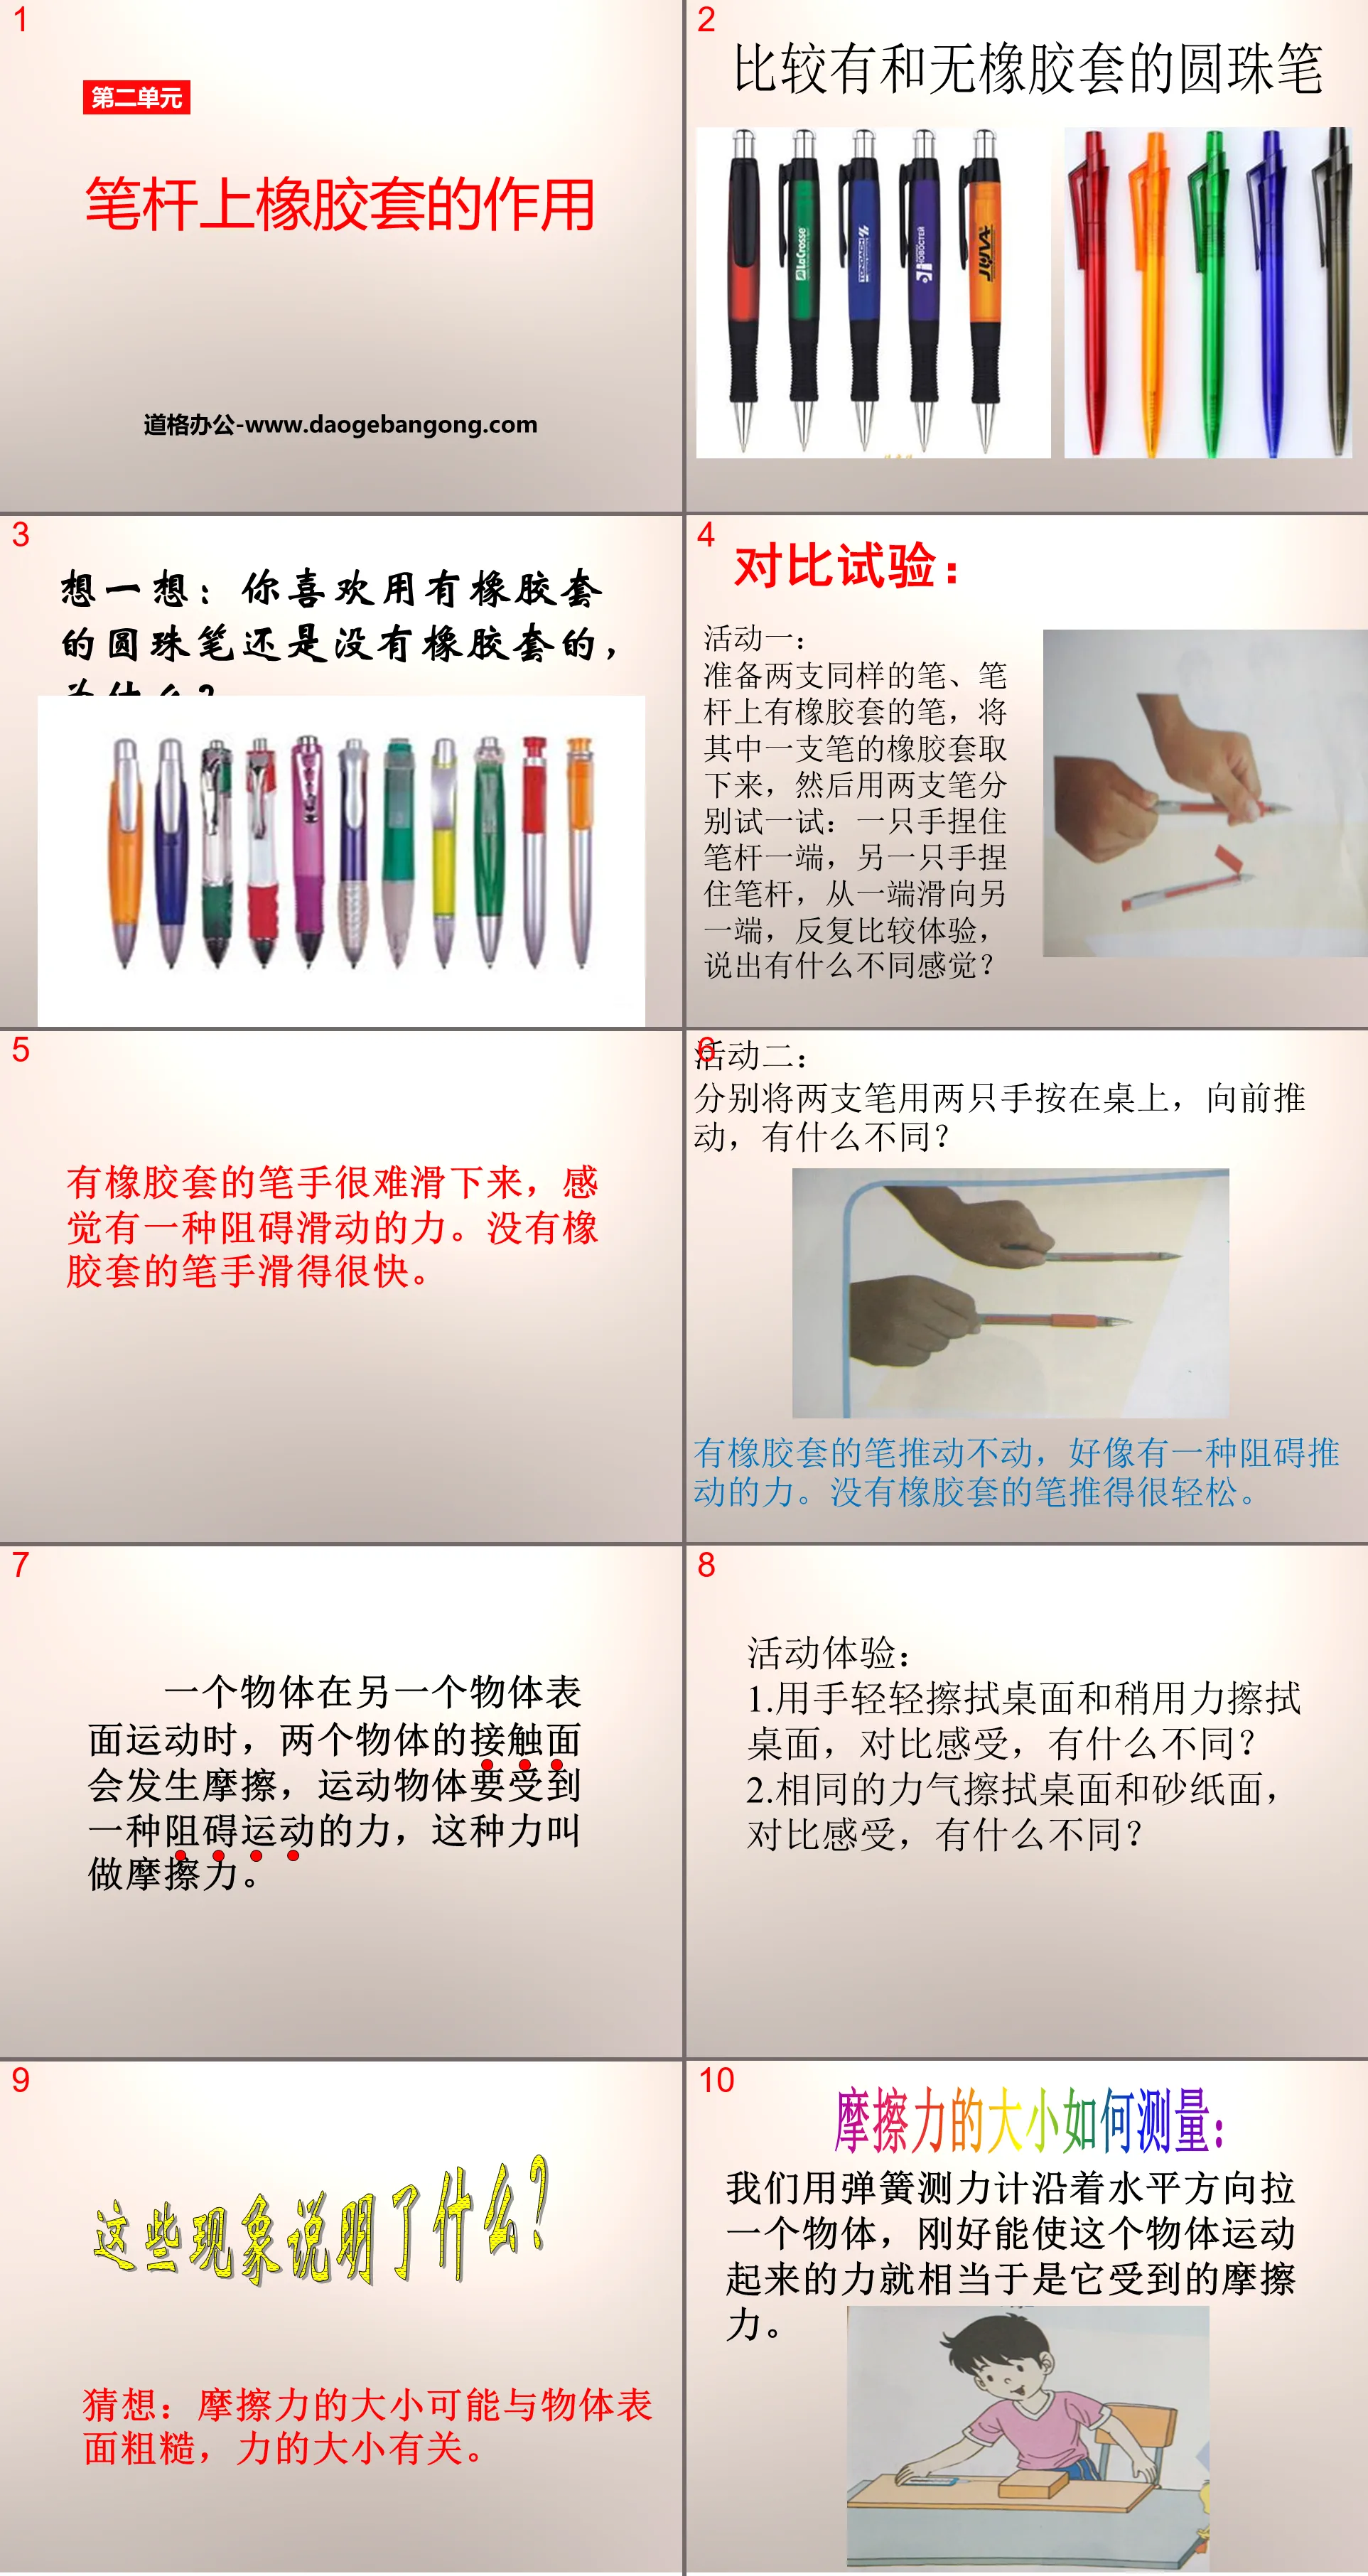 "The Function of the Rubber Cover on the Pen Holder" PPT Courseware 2